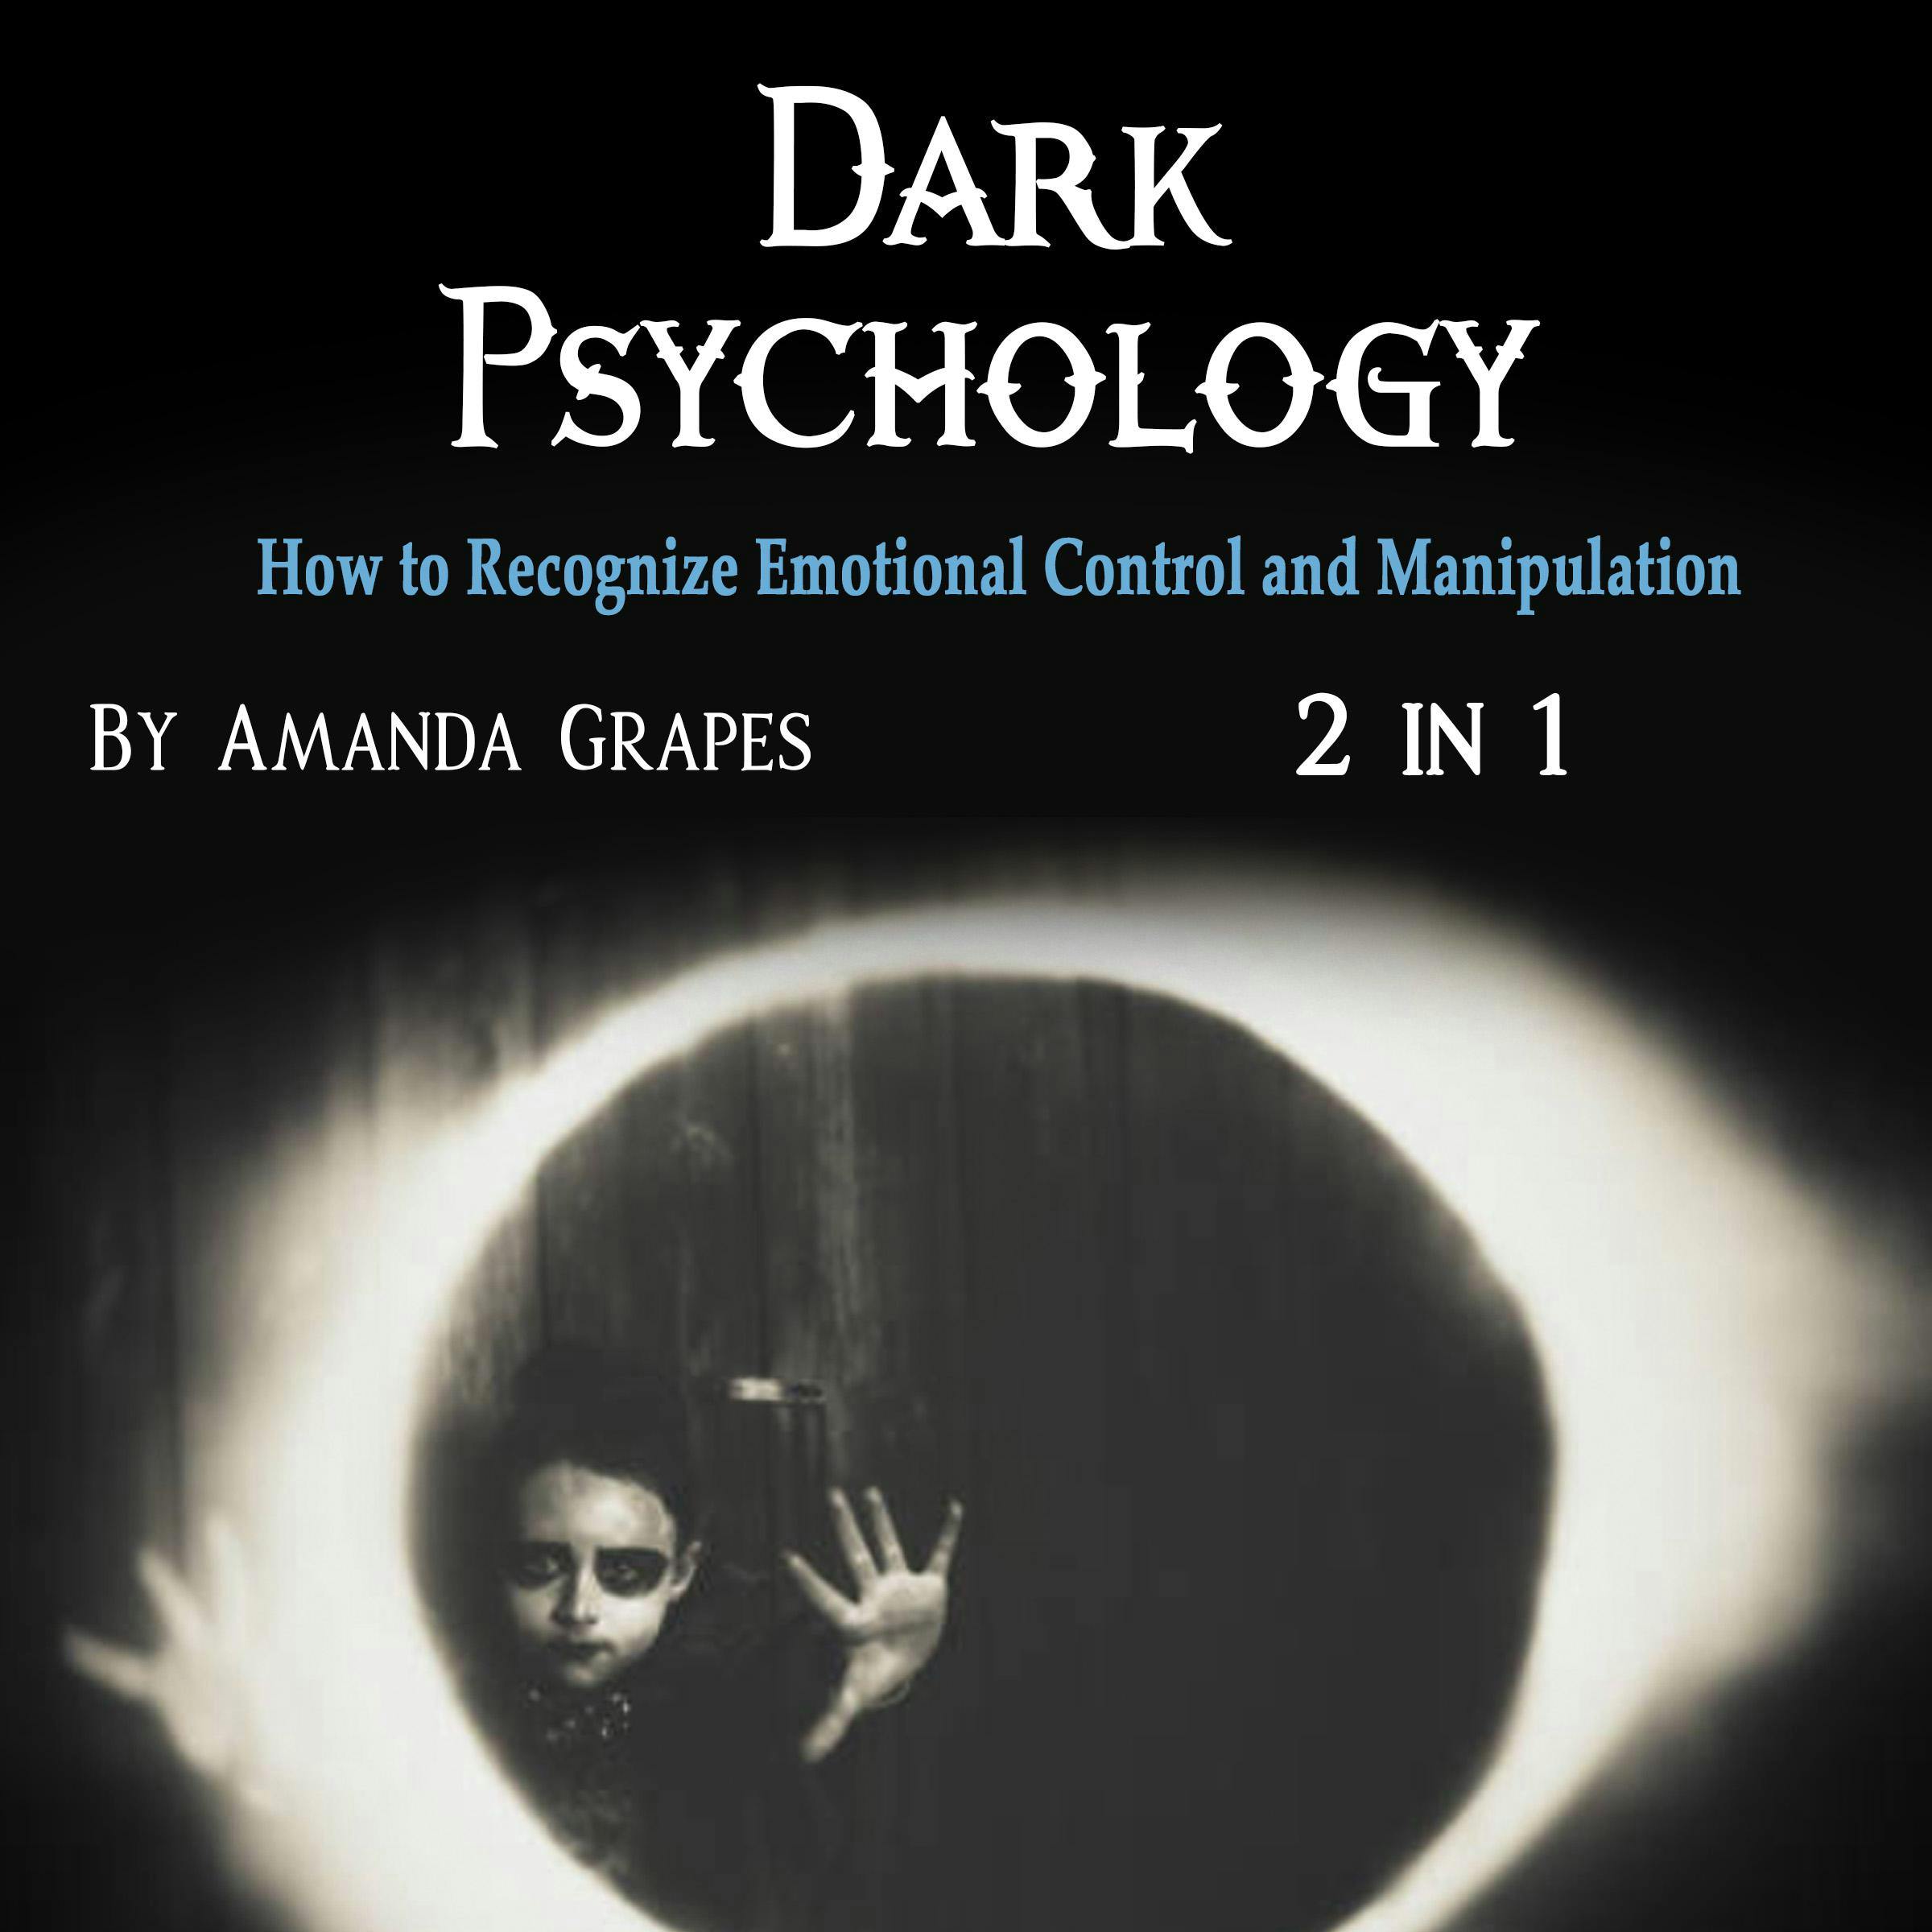 Dark Psychology: How to Recognize Emotional Control and Manipulation - Amanda Grapes